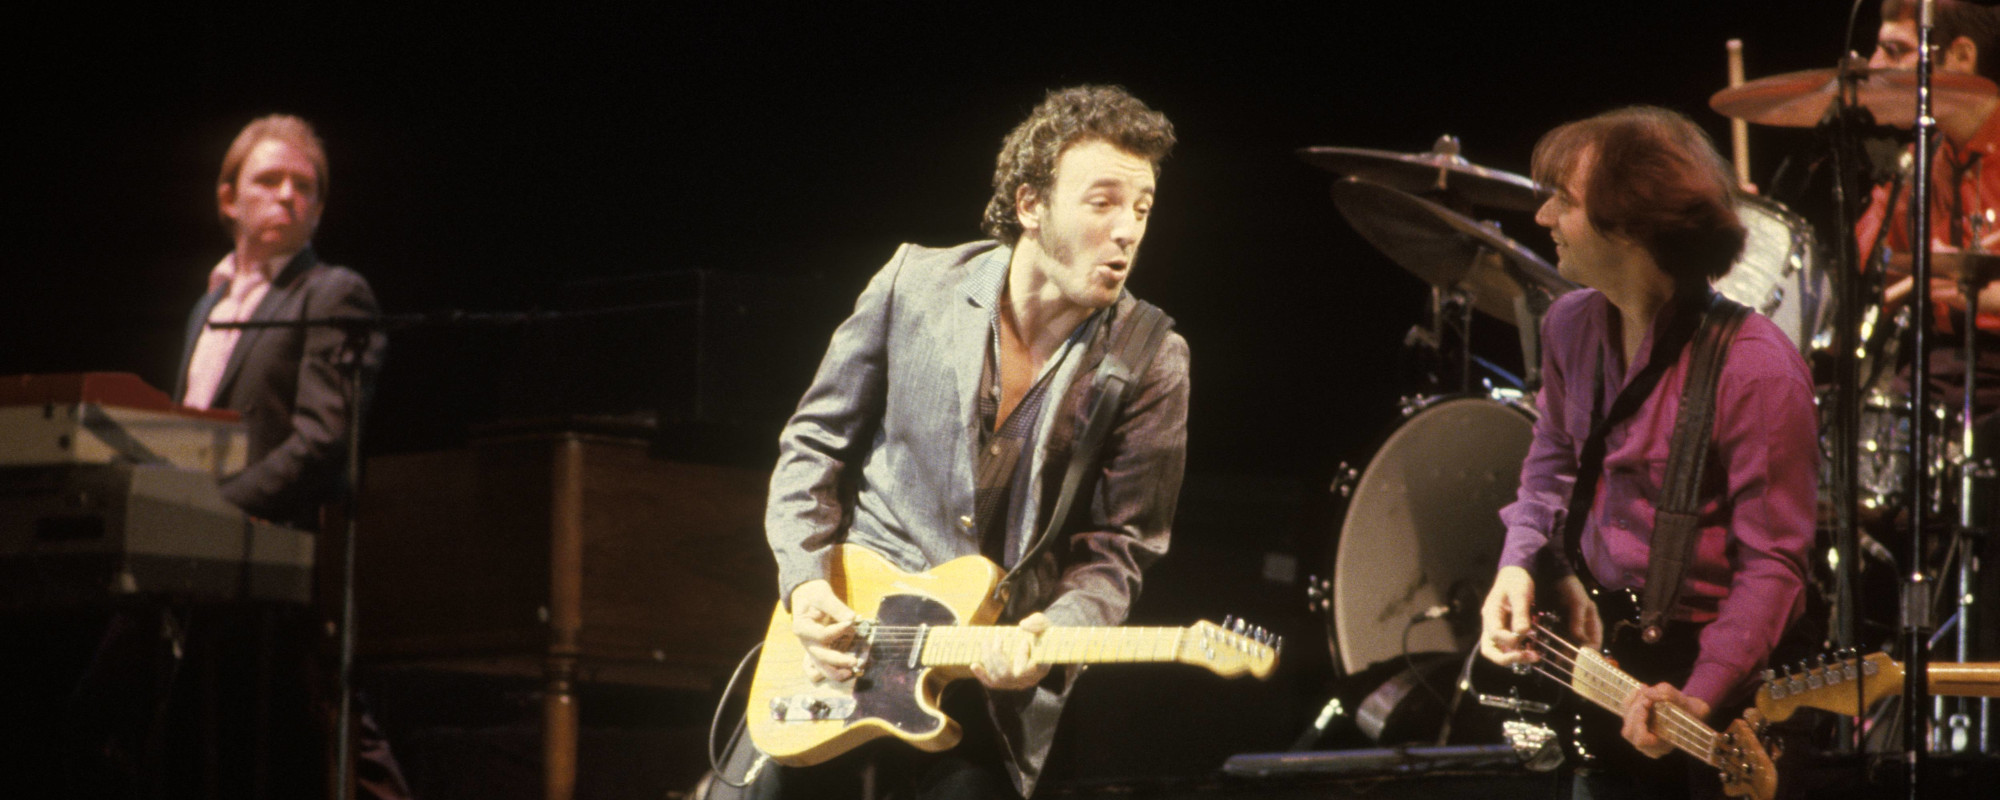 Ranking the 5 Best Bruce Springsteen Songs of the ’80s